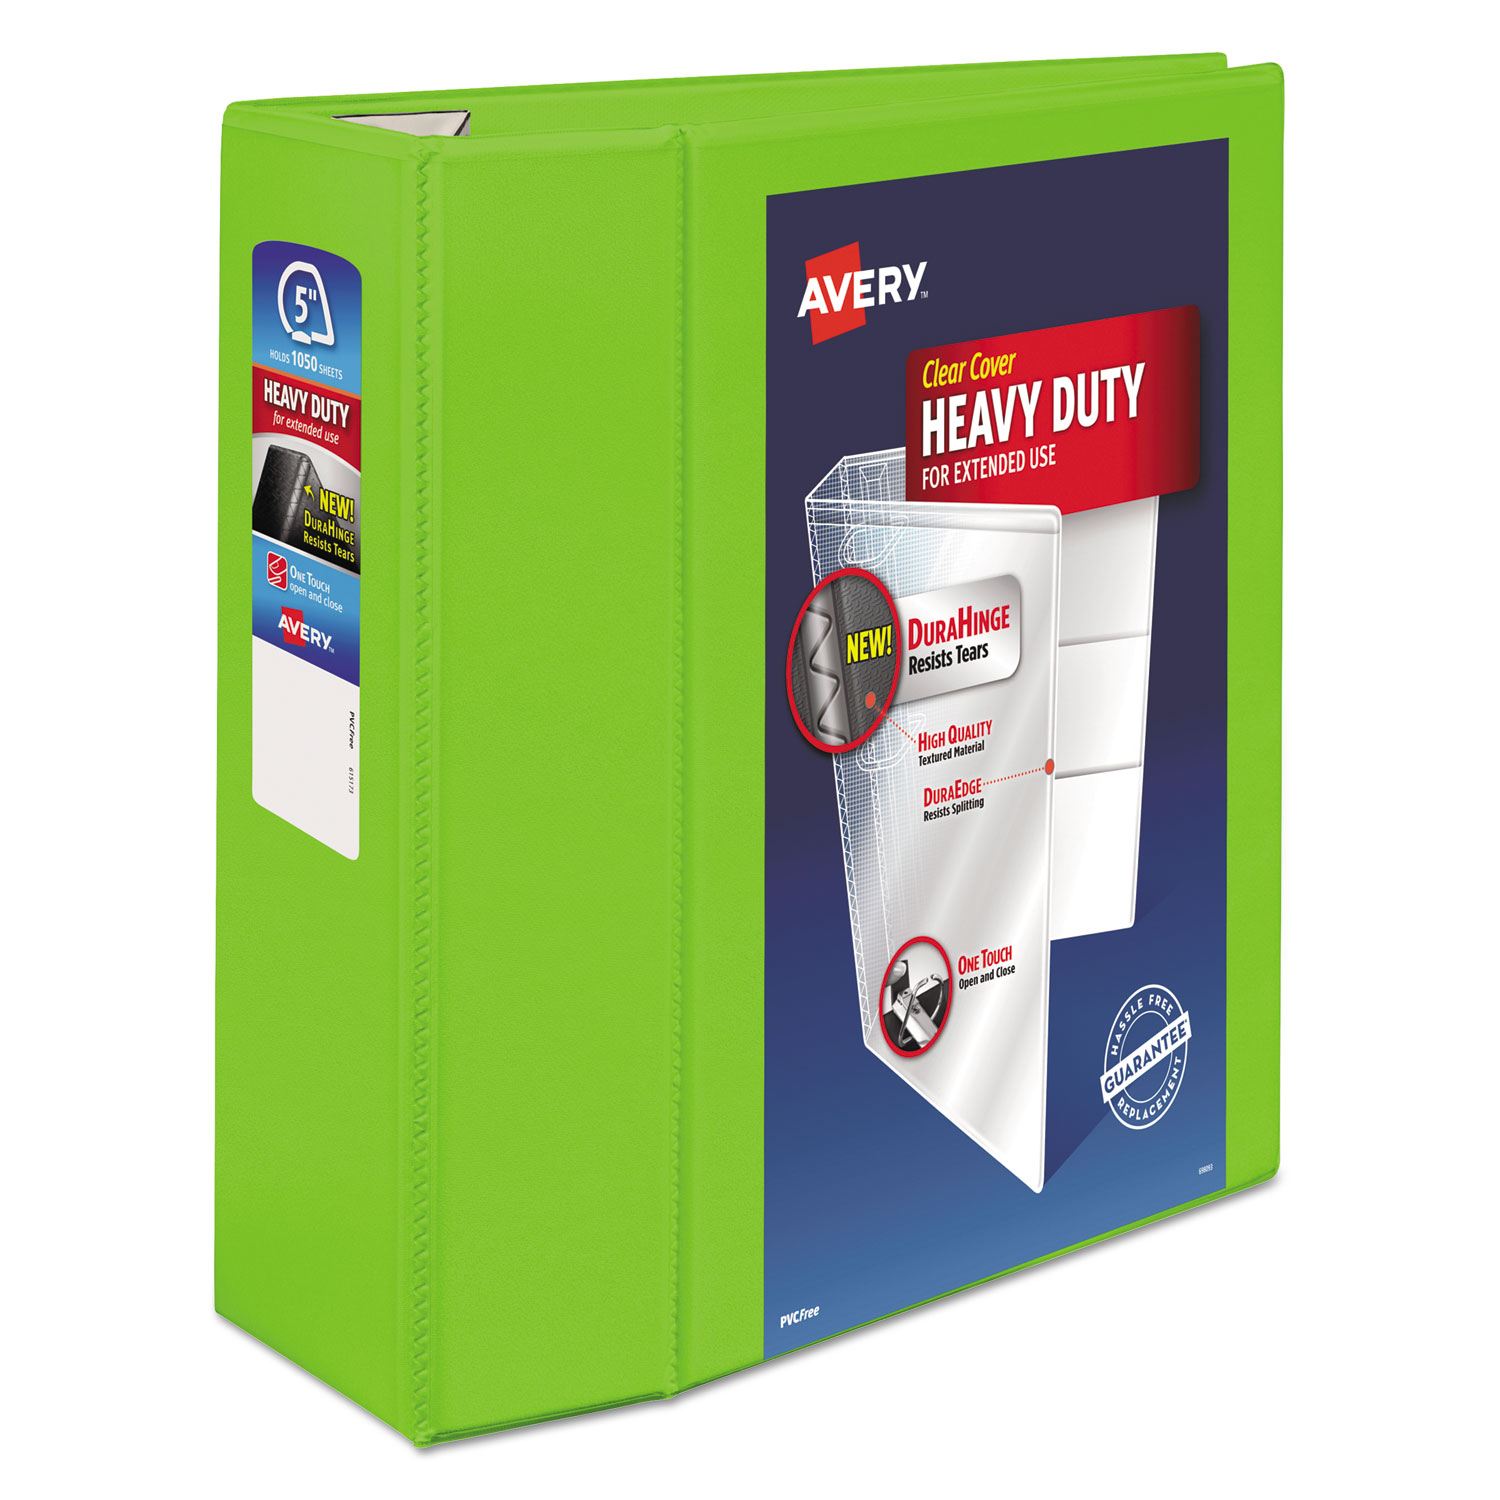  Avery 79815 Heavy-Duty View Binder with DuraHinge and Locking One Touch EZD Rings, 3 Rings, 5 Capacity, 11 x 8.5, Chartreuse (AVE79815) 